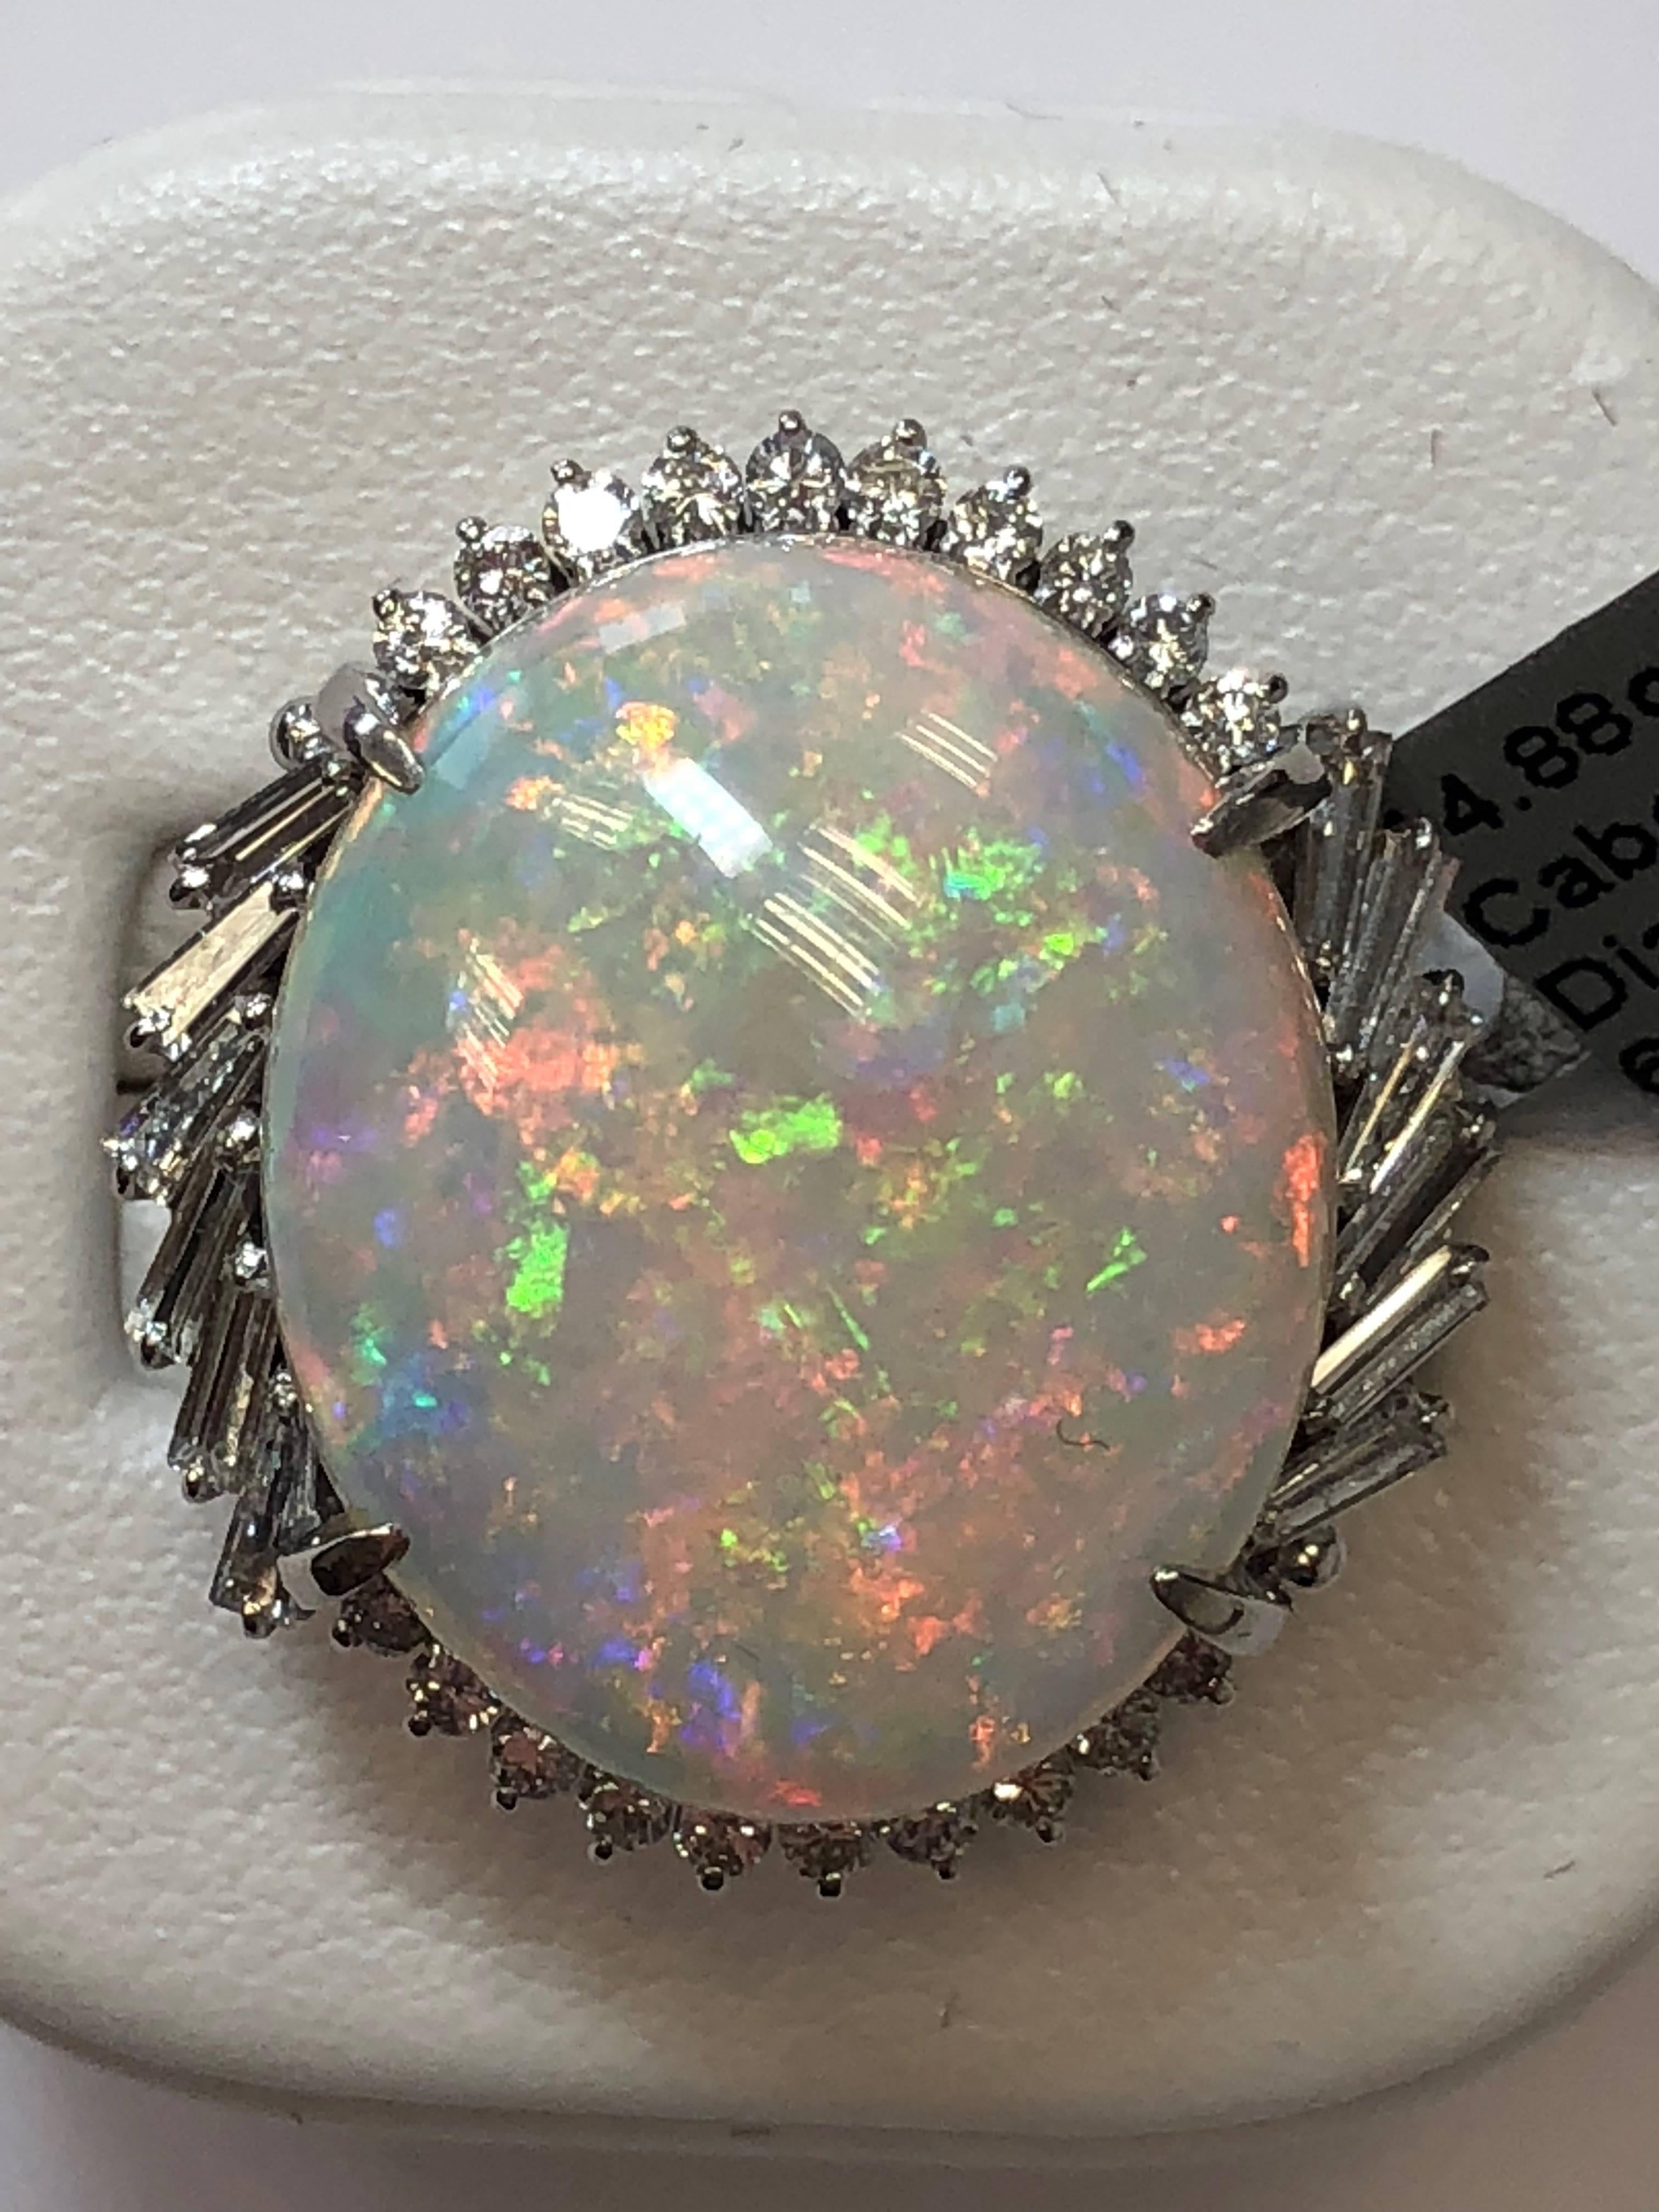 14.88 carat multi color opal cabochon with 0.97 carats of white diamonds in a platinum ring.  This opal has a gorgeous vibrant color that would make any outfit shine.  Size 6.25.